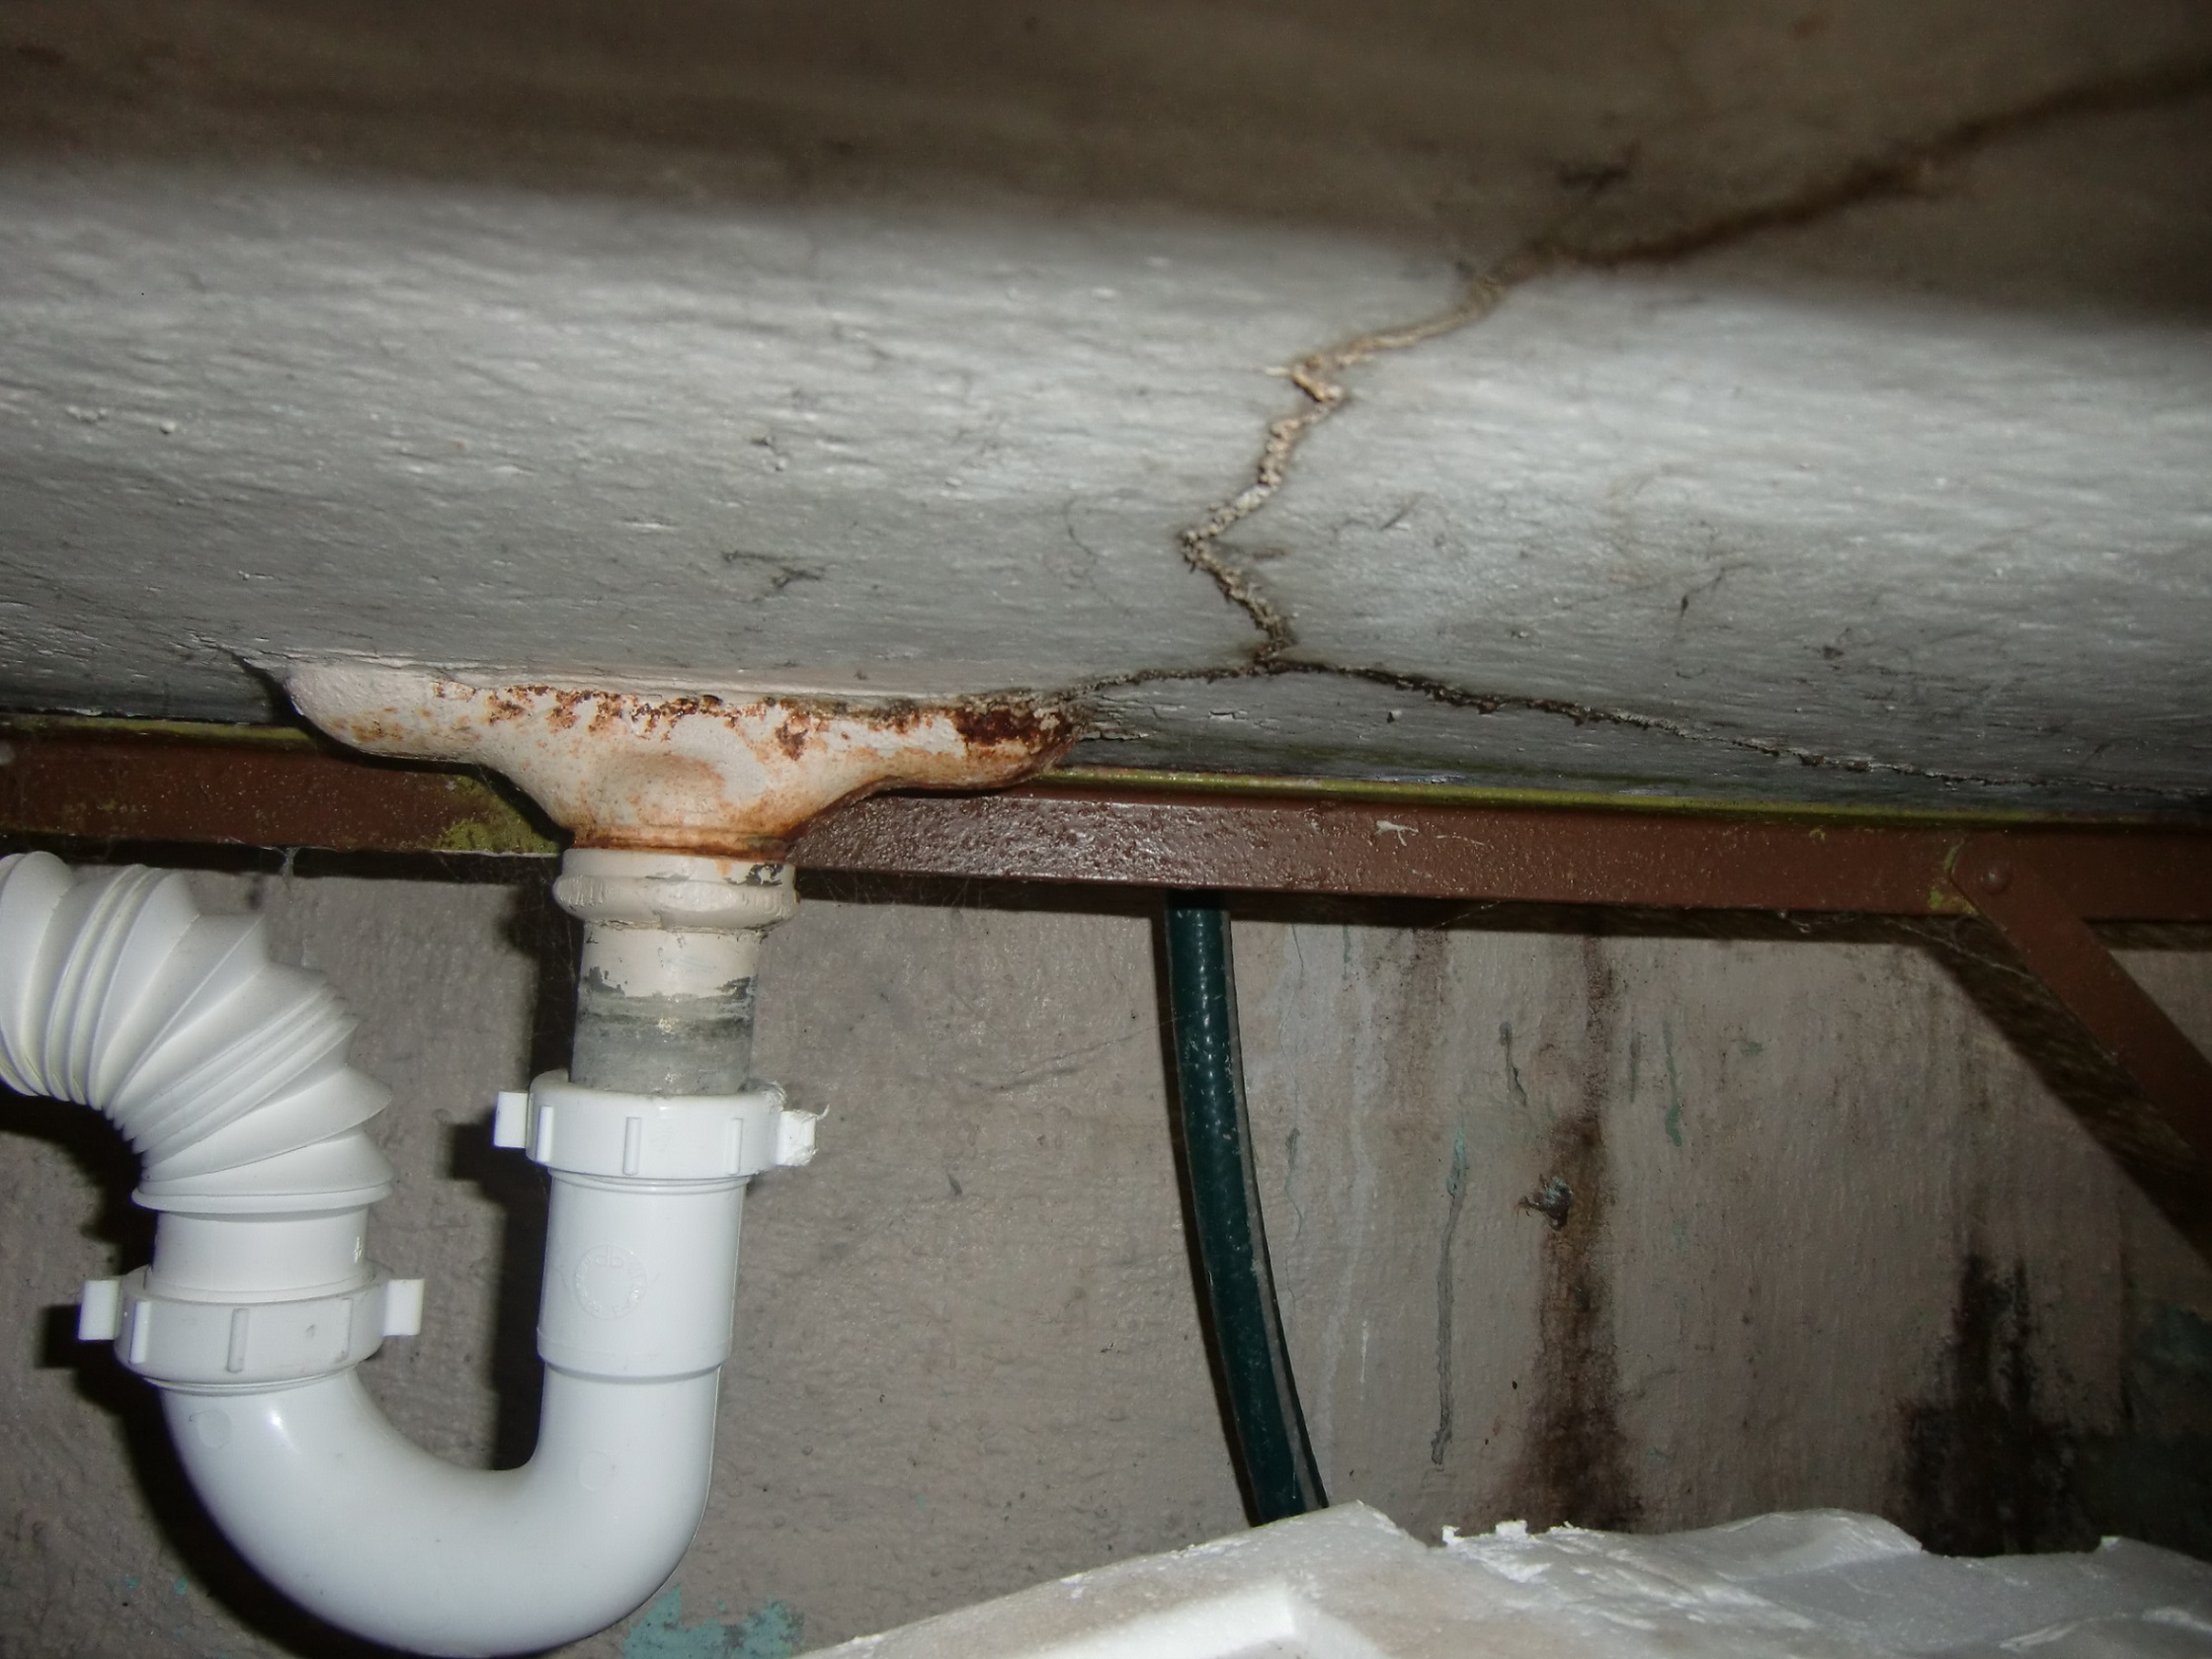 A cracked and leaking concrete laundry sink. "Chicago Home Inspection"